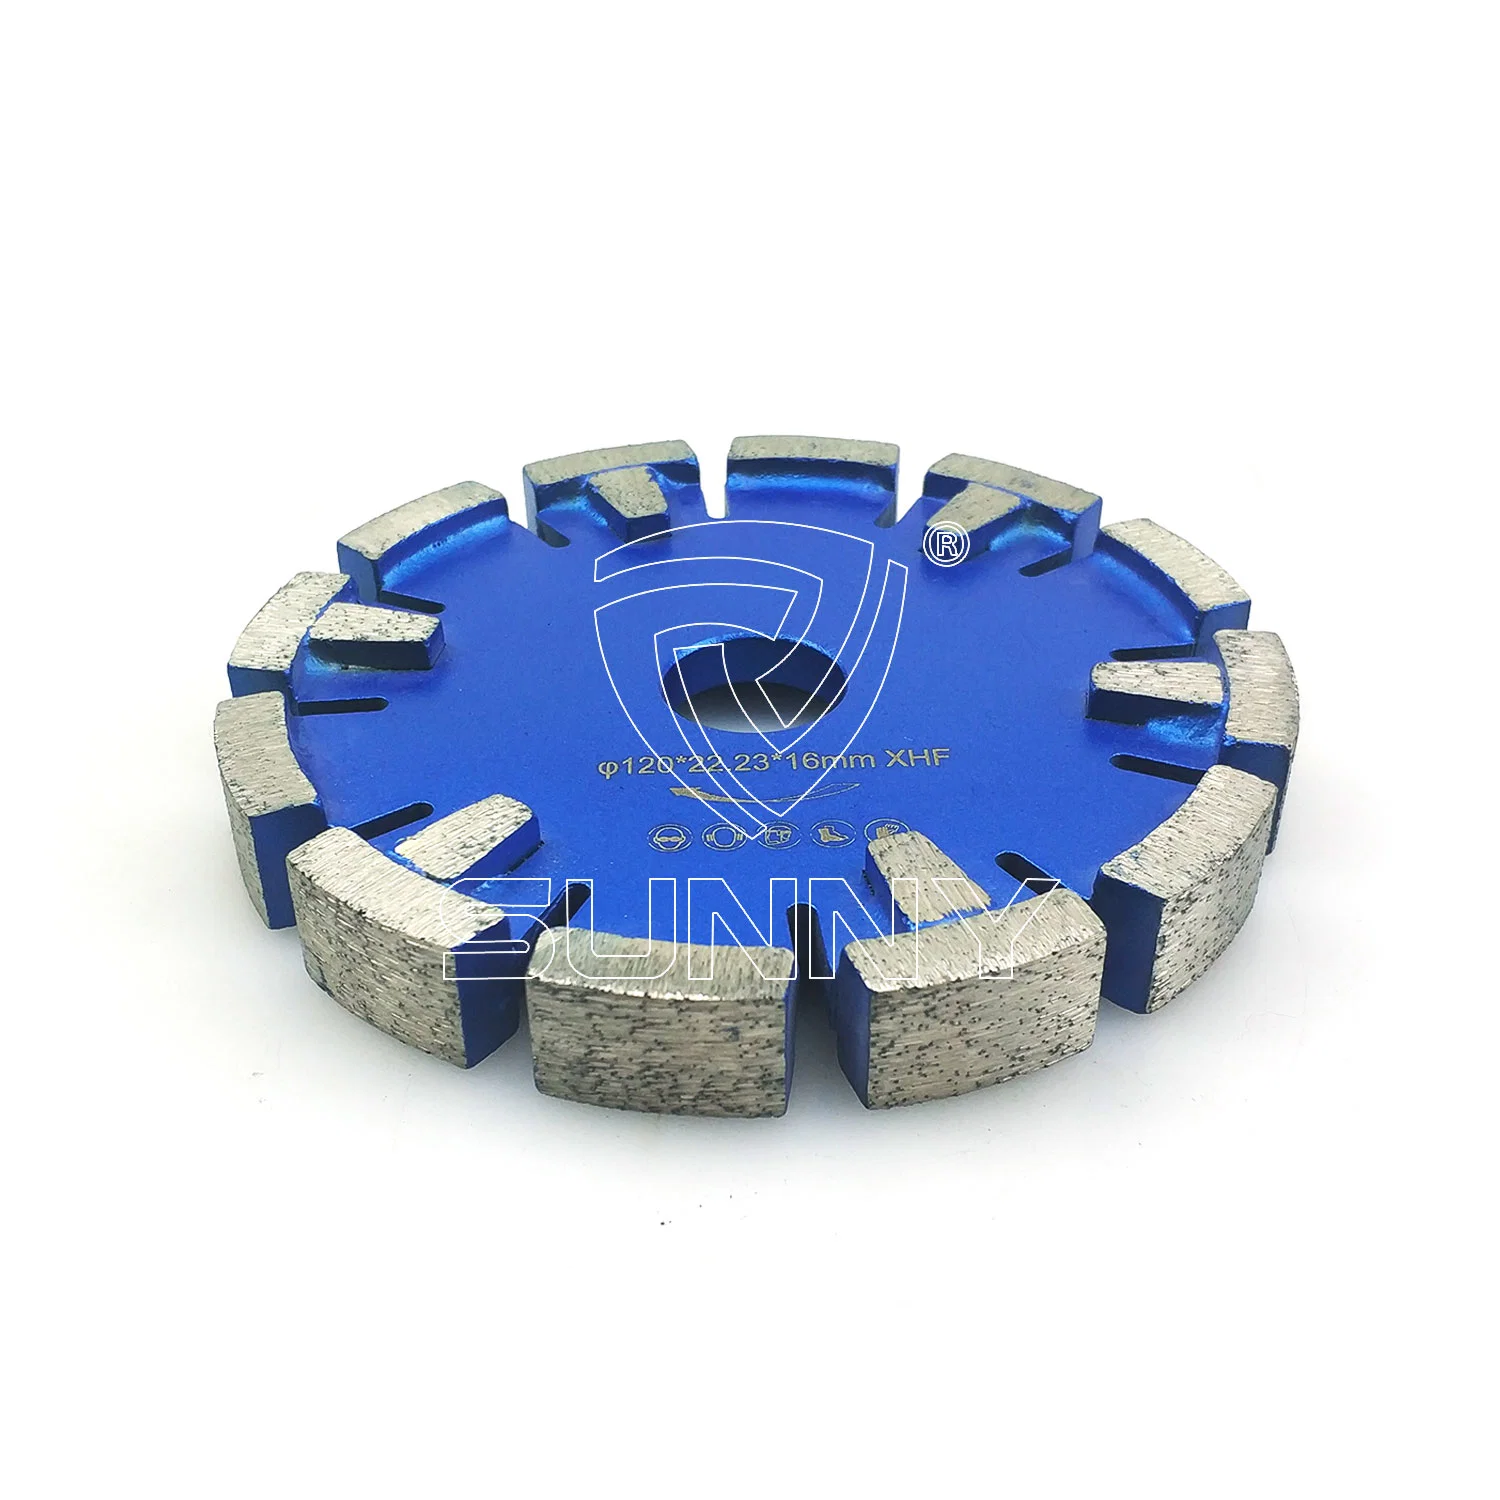 125mm Laser Welding Concrete Tuck Pointing Diamond Blade with Protective Teeth